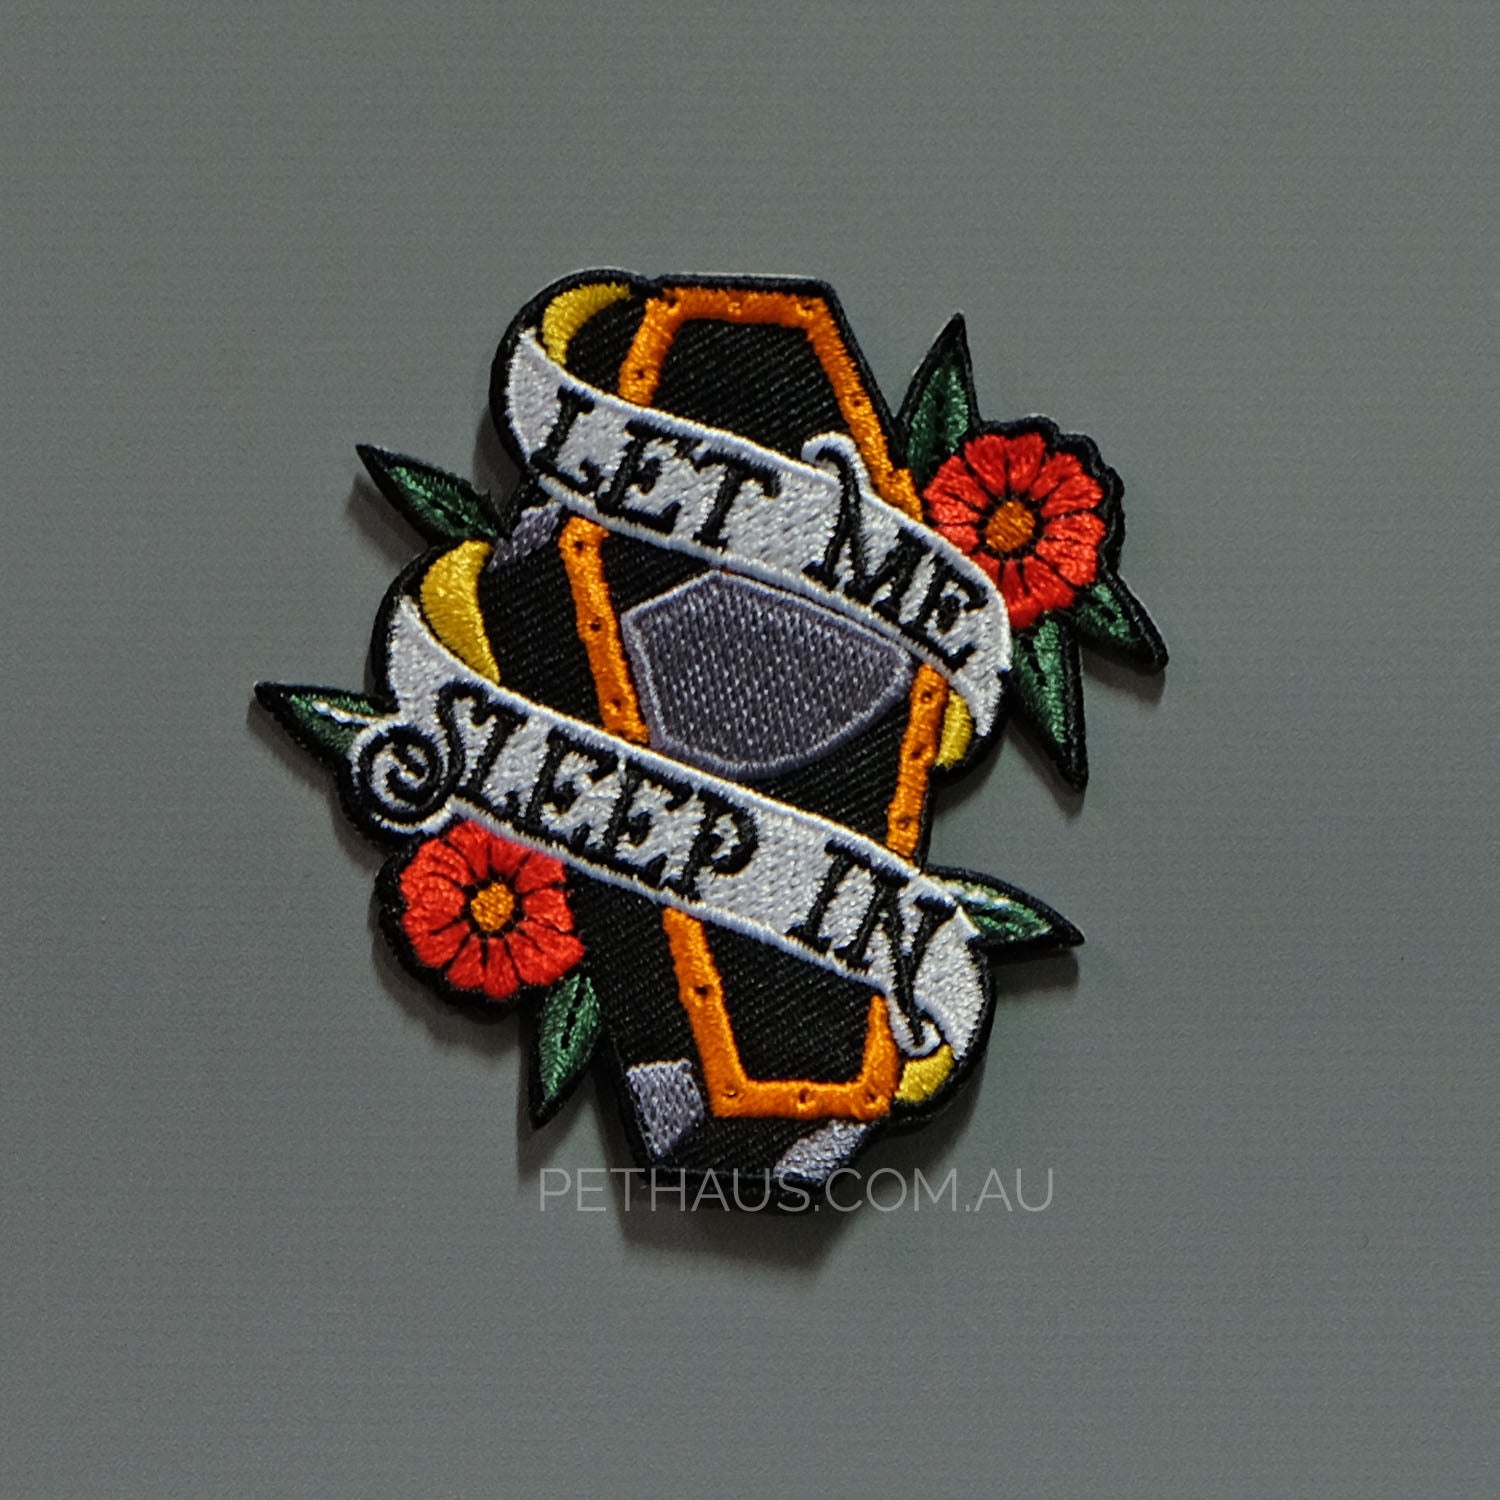 let me sleep in patch, coffin patch, sleep patch, tattoo patch, rockabilly patch , patch for dog, pethaus